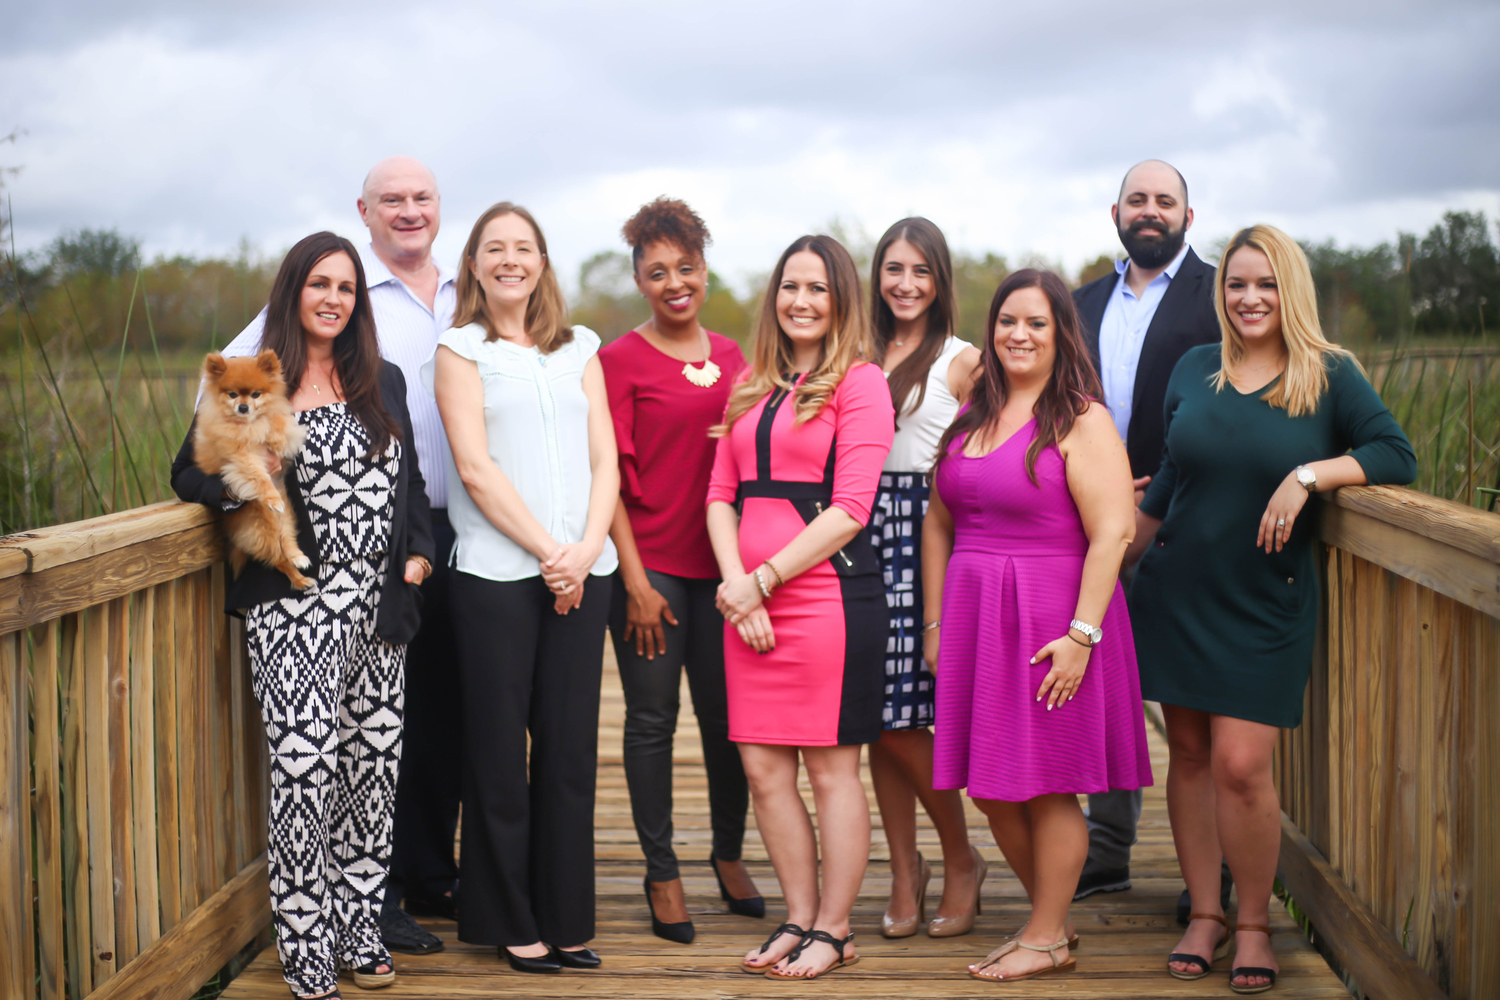 Gallery Photo of The team at Caring Therapists of Broward